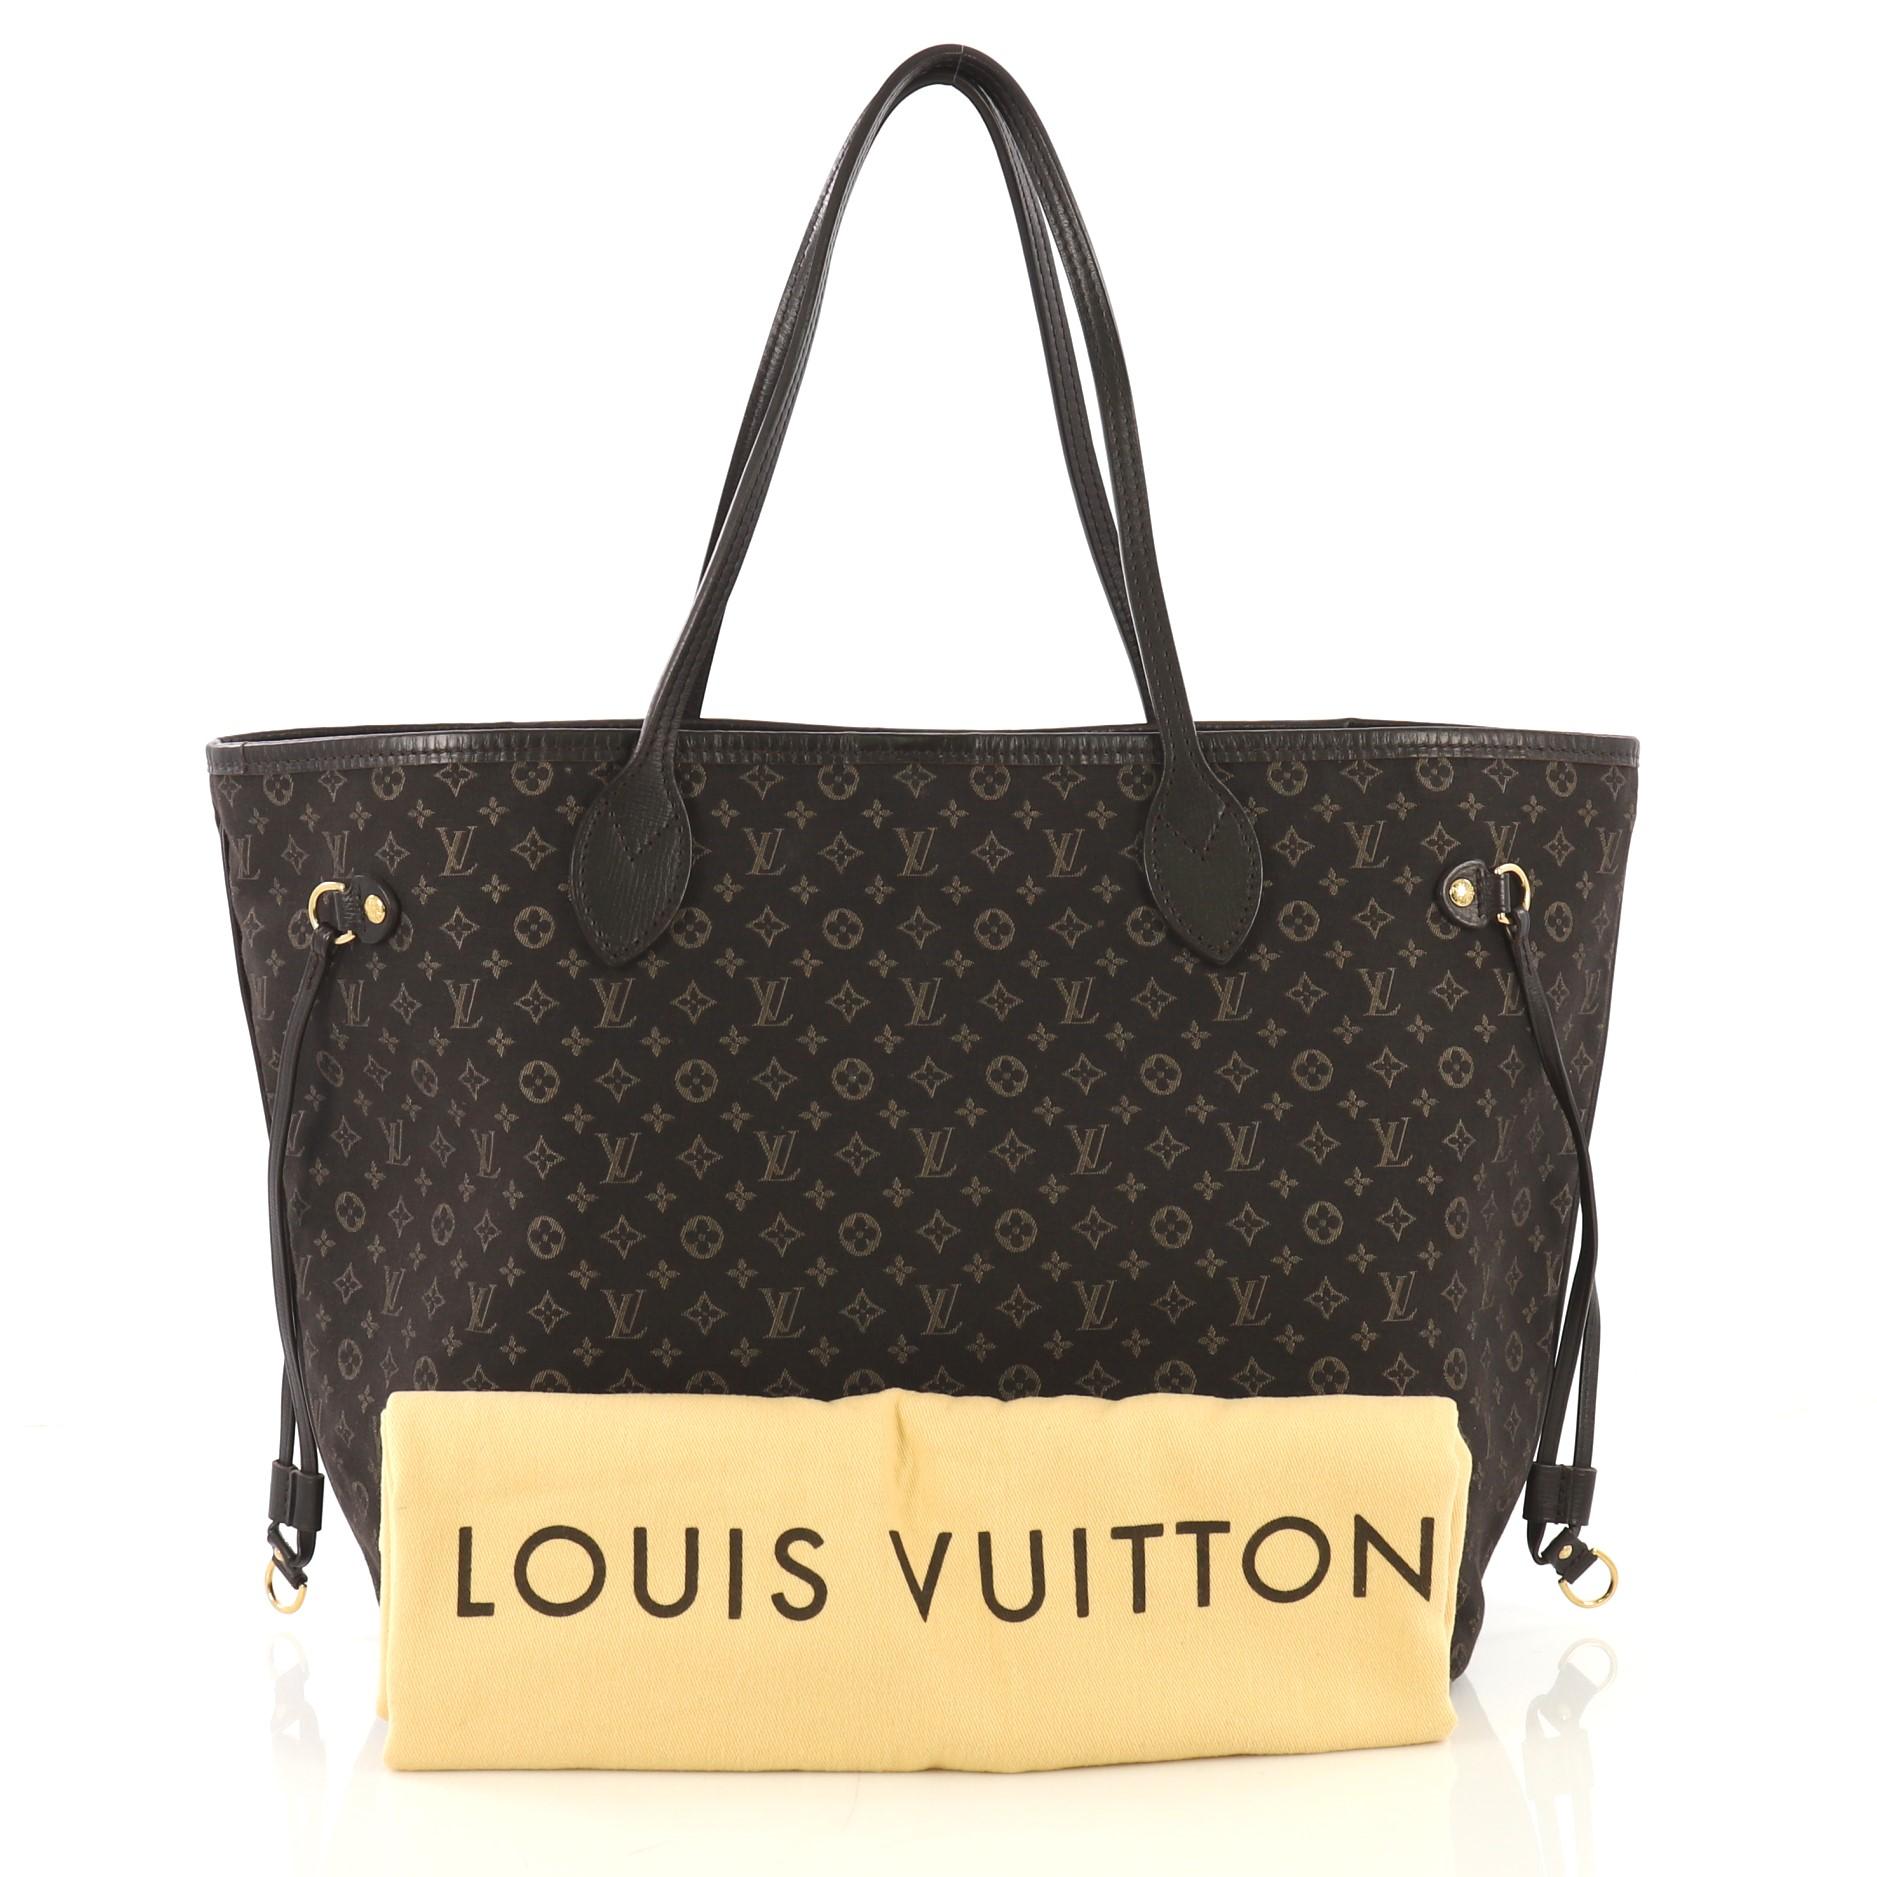 This Louis Vuitton Neverfull Tote Monogram Idylle MM, crafted in dark brown Monogram Idylle, features dual slim handles, side laces, and gold-tone hardware. Its wide open top showcases a dark brown fabric interior with side zip pocket. Authenticity